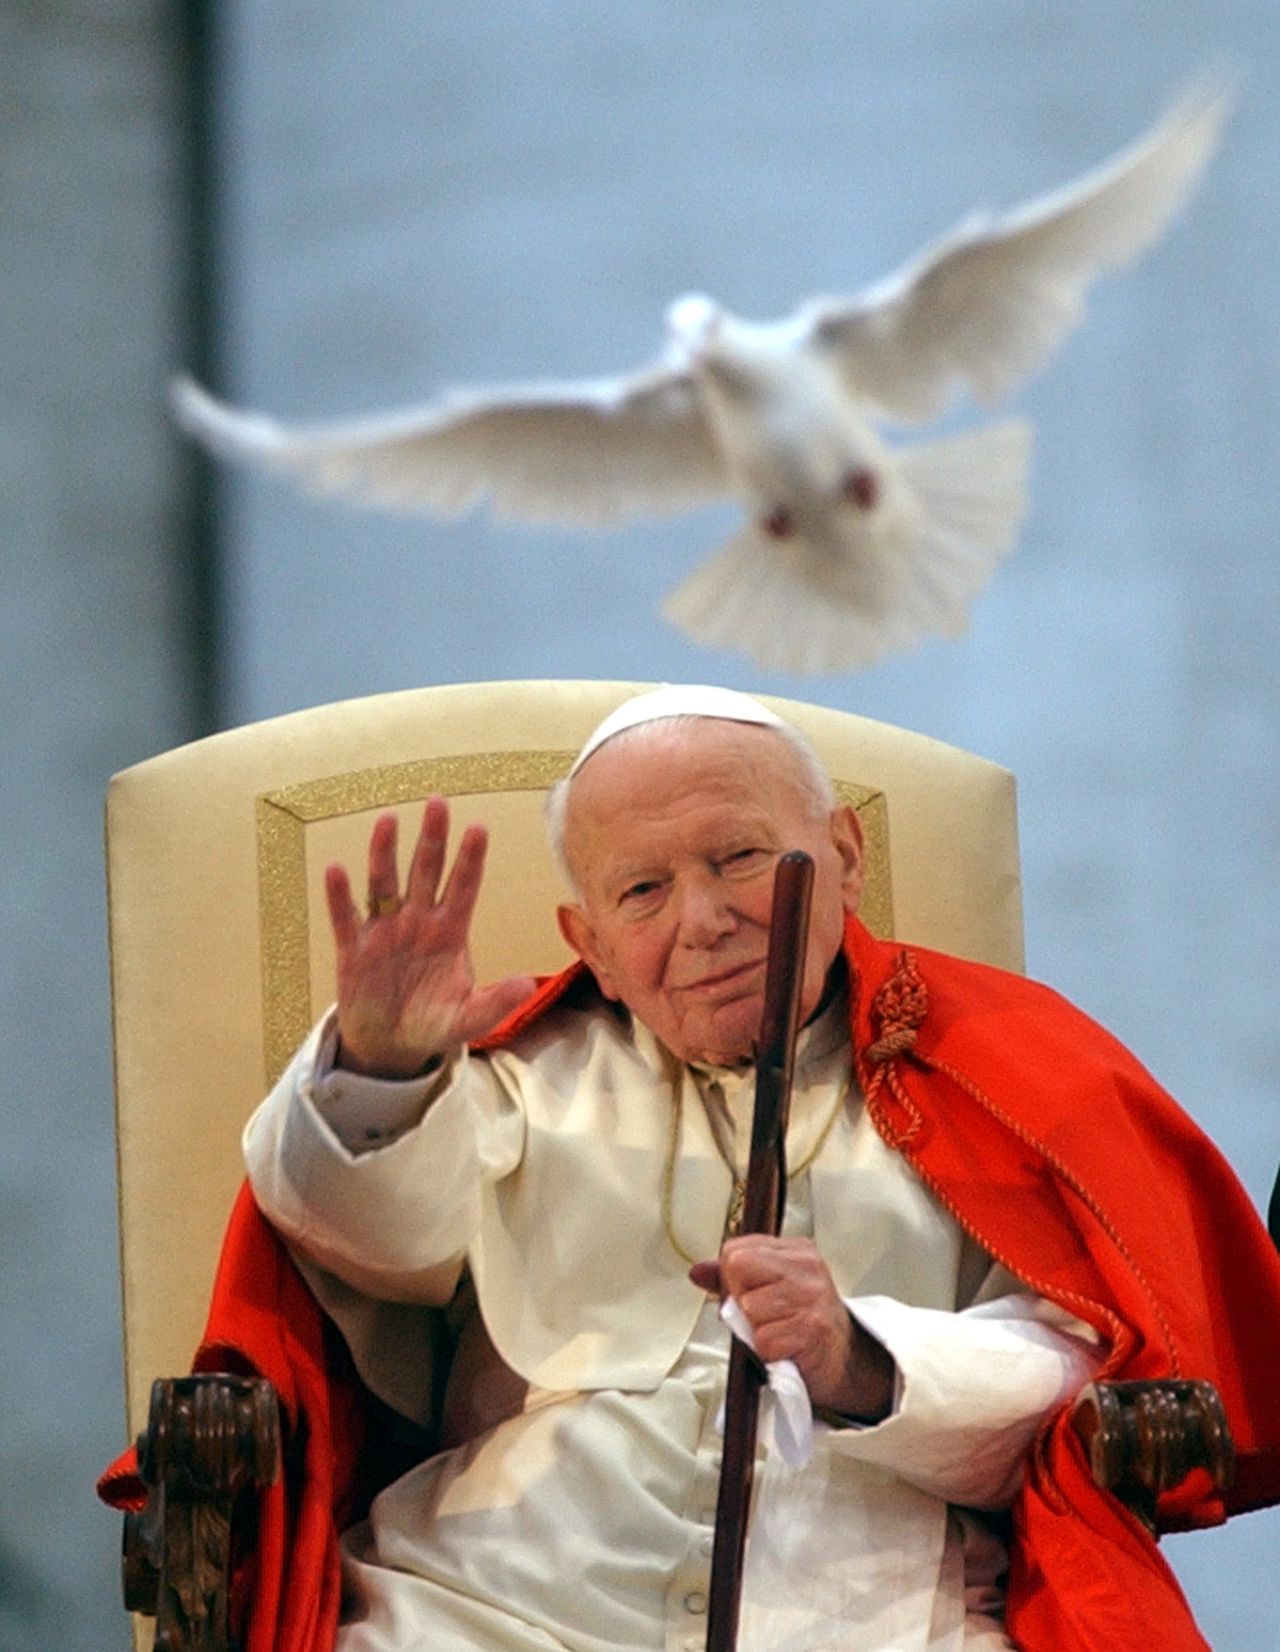 FILE - This April 10, 2003 file photo shows Pope John Paul II as a white dove is released in honor of his repeated calls for peace by Roman youths, in St. Peter's Square at the Vatican. Pope Benedict XVI on Saturday, Dec. 19, 2009, moved Pope John Paul II one step closer to possible beatification, the major milestone before he can be declared a saint. Benedict signed a decree attesting to John Paul's heroic virtues. (AP Photo/Massimo Sambucetti, file)